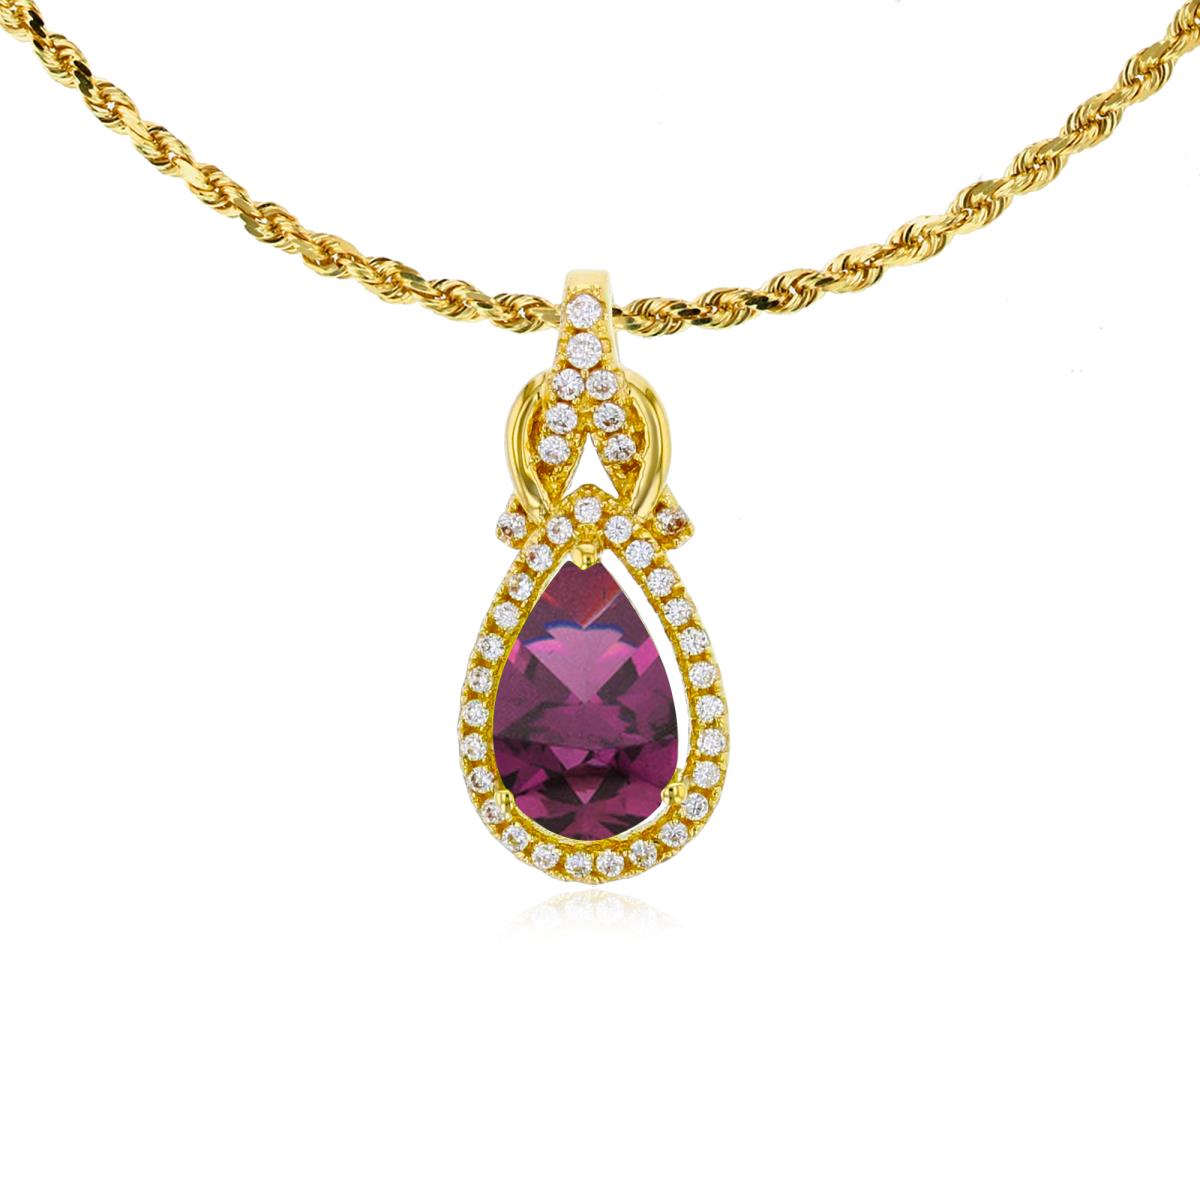 10K Yellow Gold 8x5mm Pear Cut Rhodolite & 0.11 CTTW Rnd Diamond Knot 18" Rope Chain Necklace